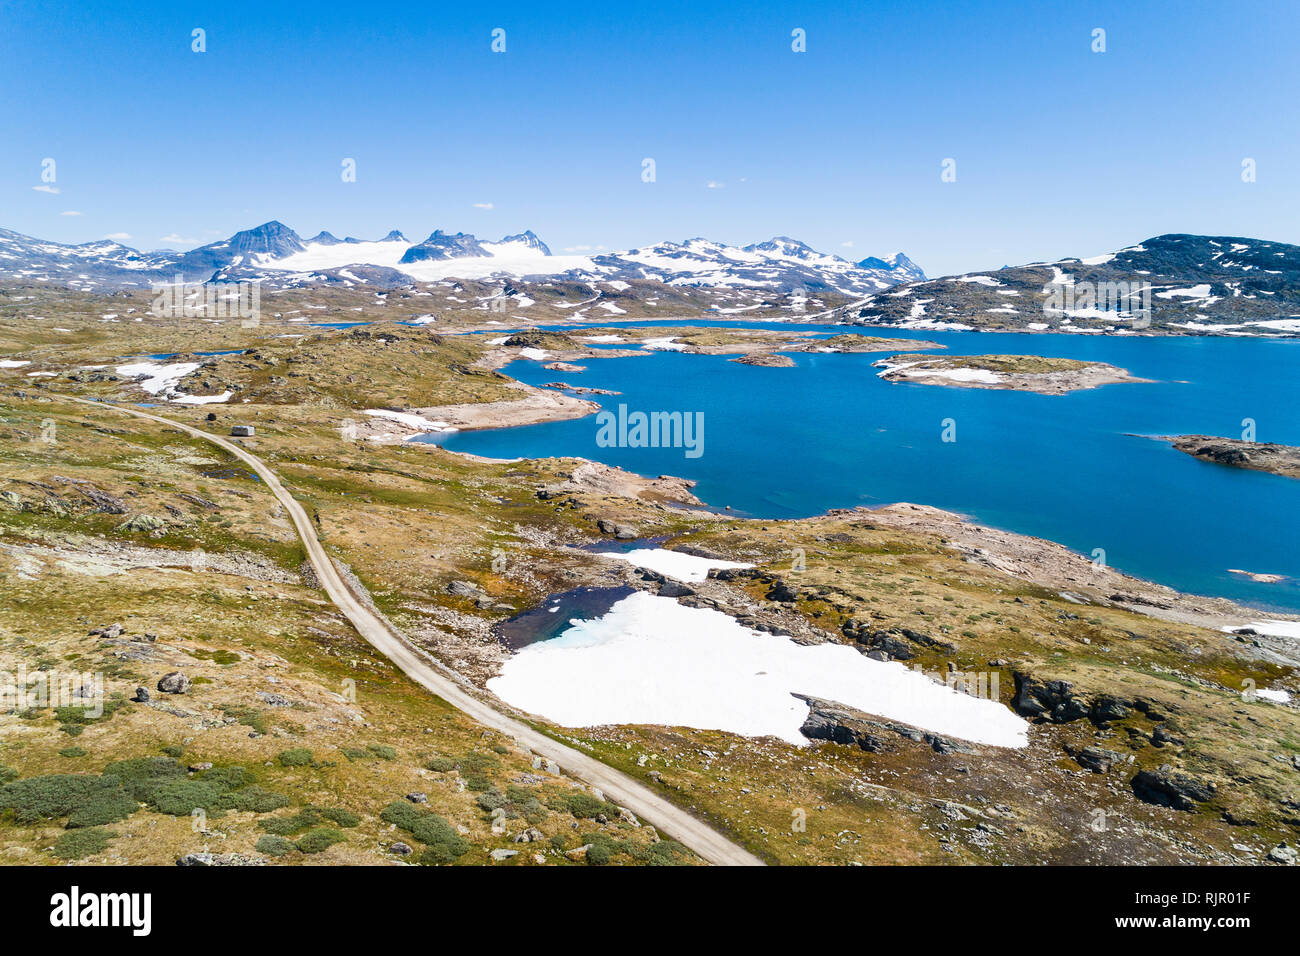 Snow covering part of landscape by lake and mountains, drone view, Sognefjell, Jotunheimen, Norway, Europe Stock Photo